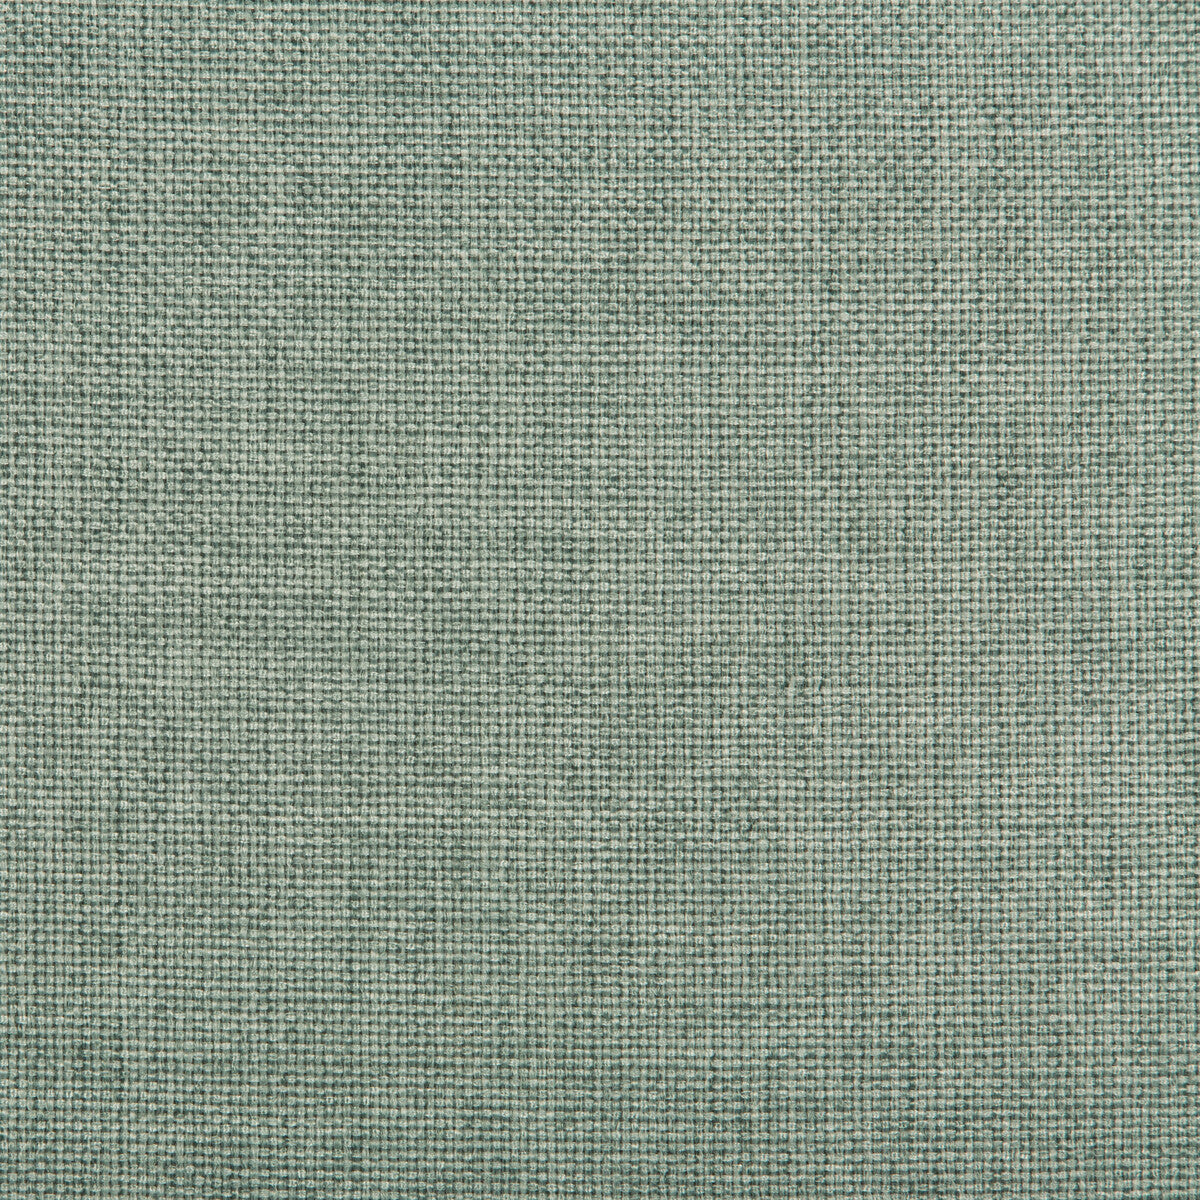 Kravet Contract fabric in 4637-35 color - pattern 4637.35.0 - by Kravet Contract